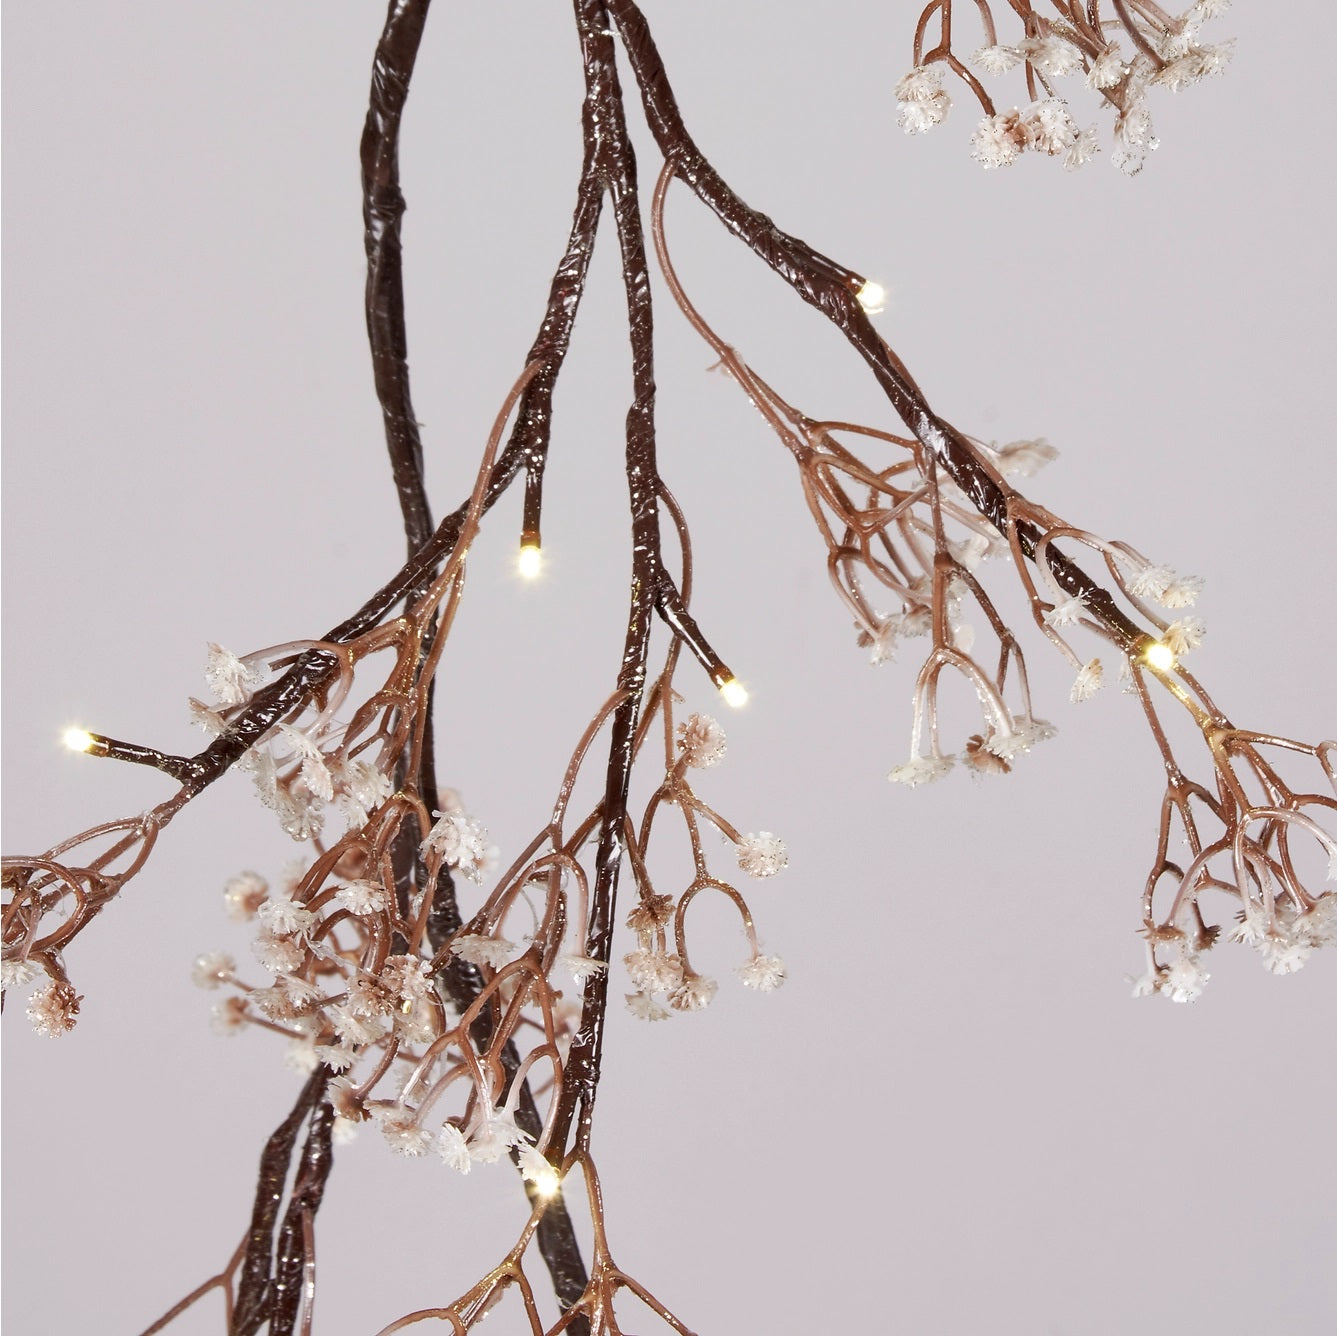 Making a baby's breath garland - The Crafted Life